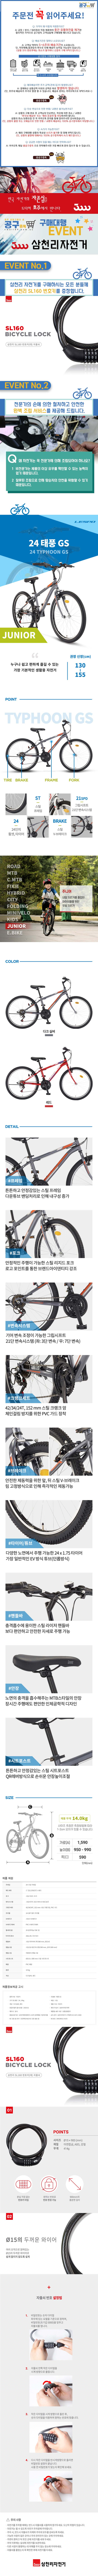 Bycicle_cycle_자전거